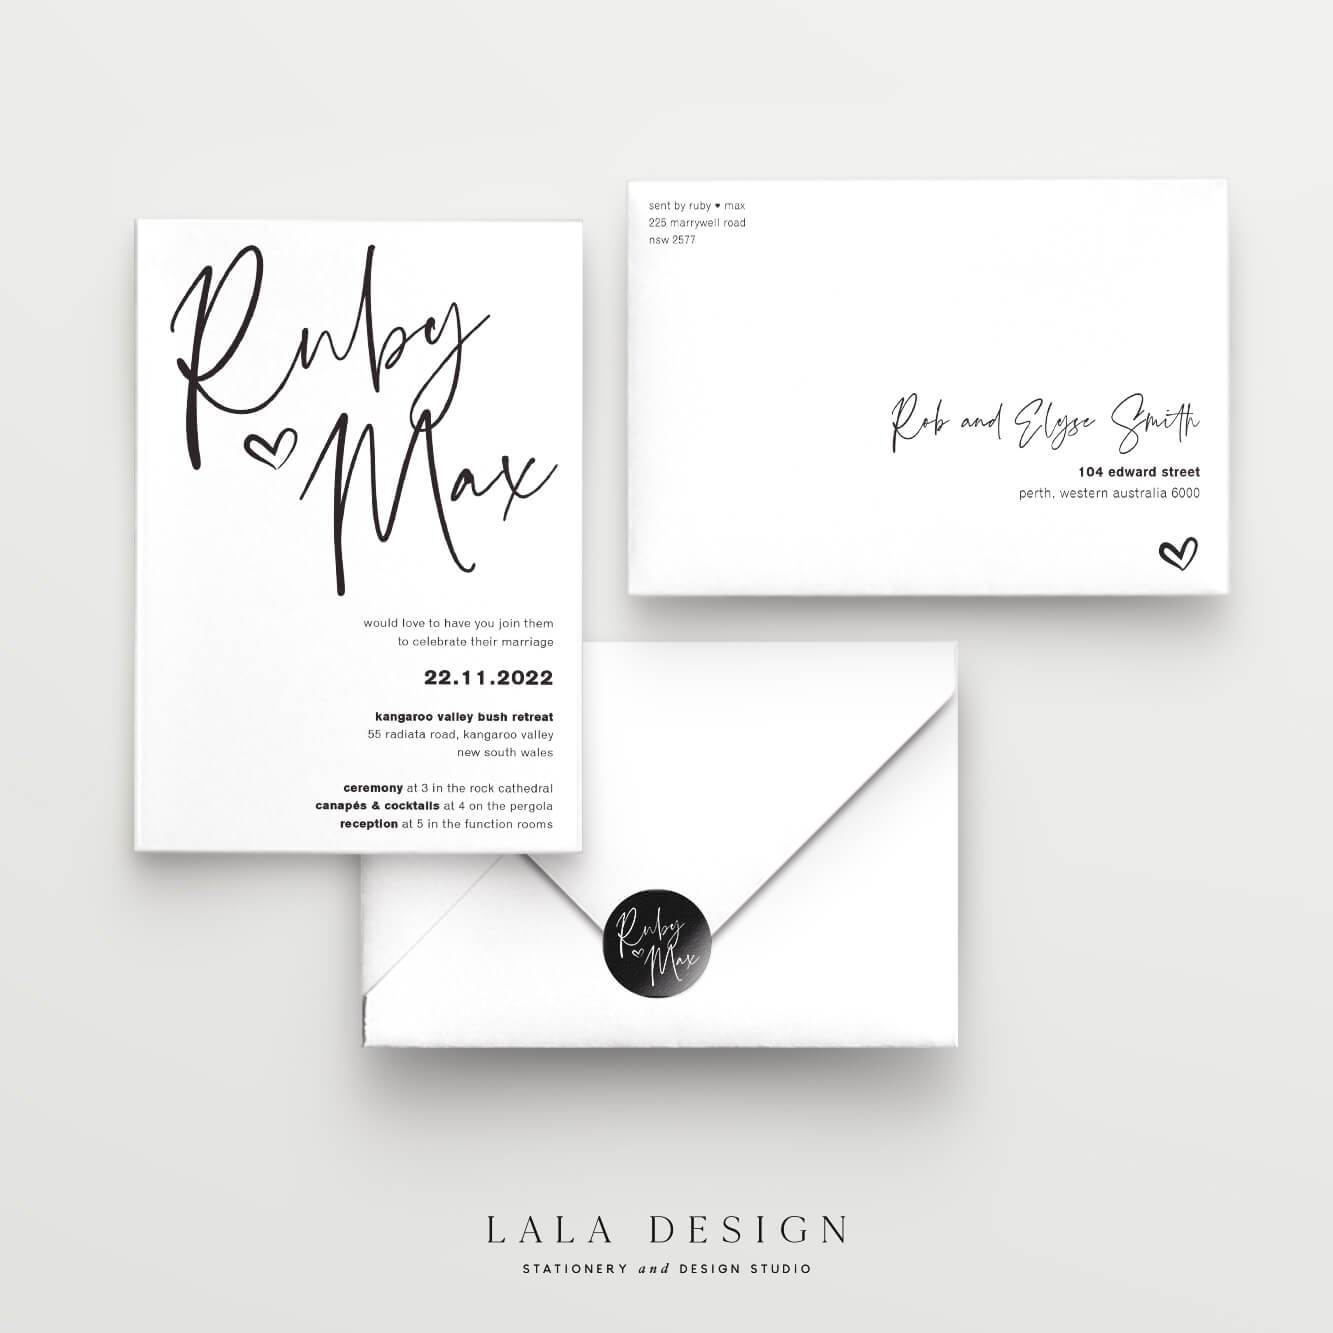 Thorne - Luxury wedding invitations you can buy now | Lala Design Perth WA